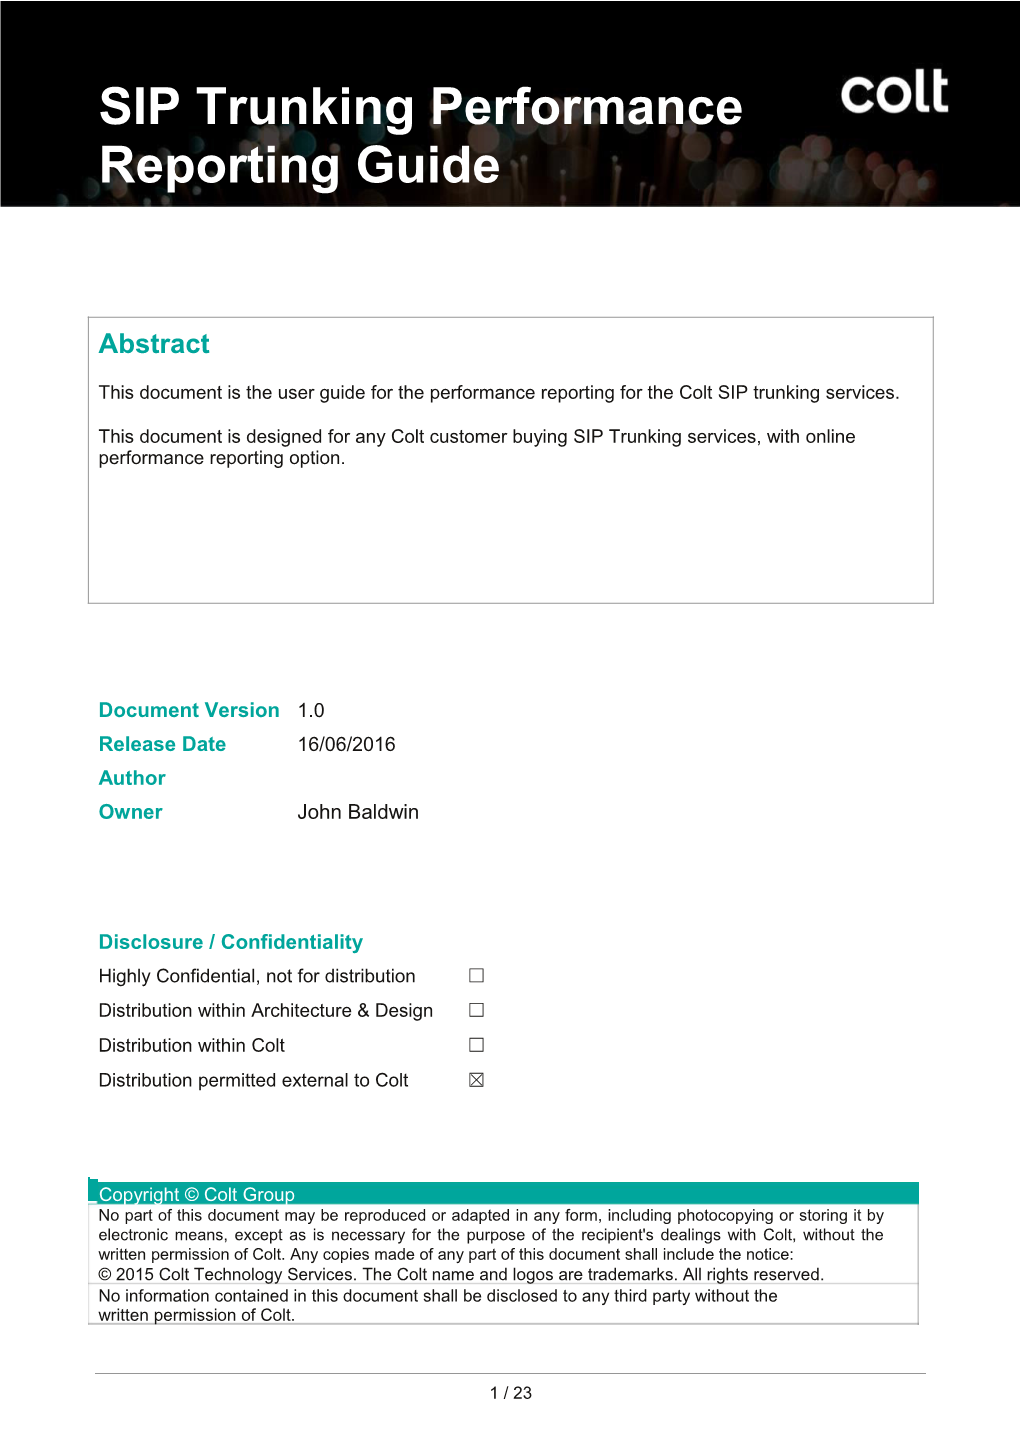 This Document Is the User Guide for the Performance Reporting for the Colt SIP Trunking